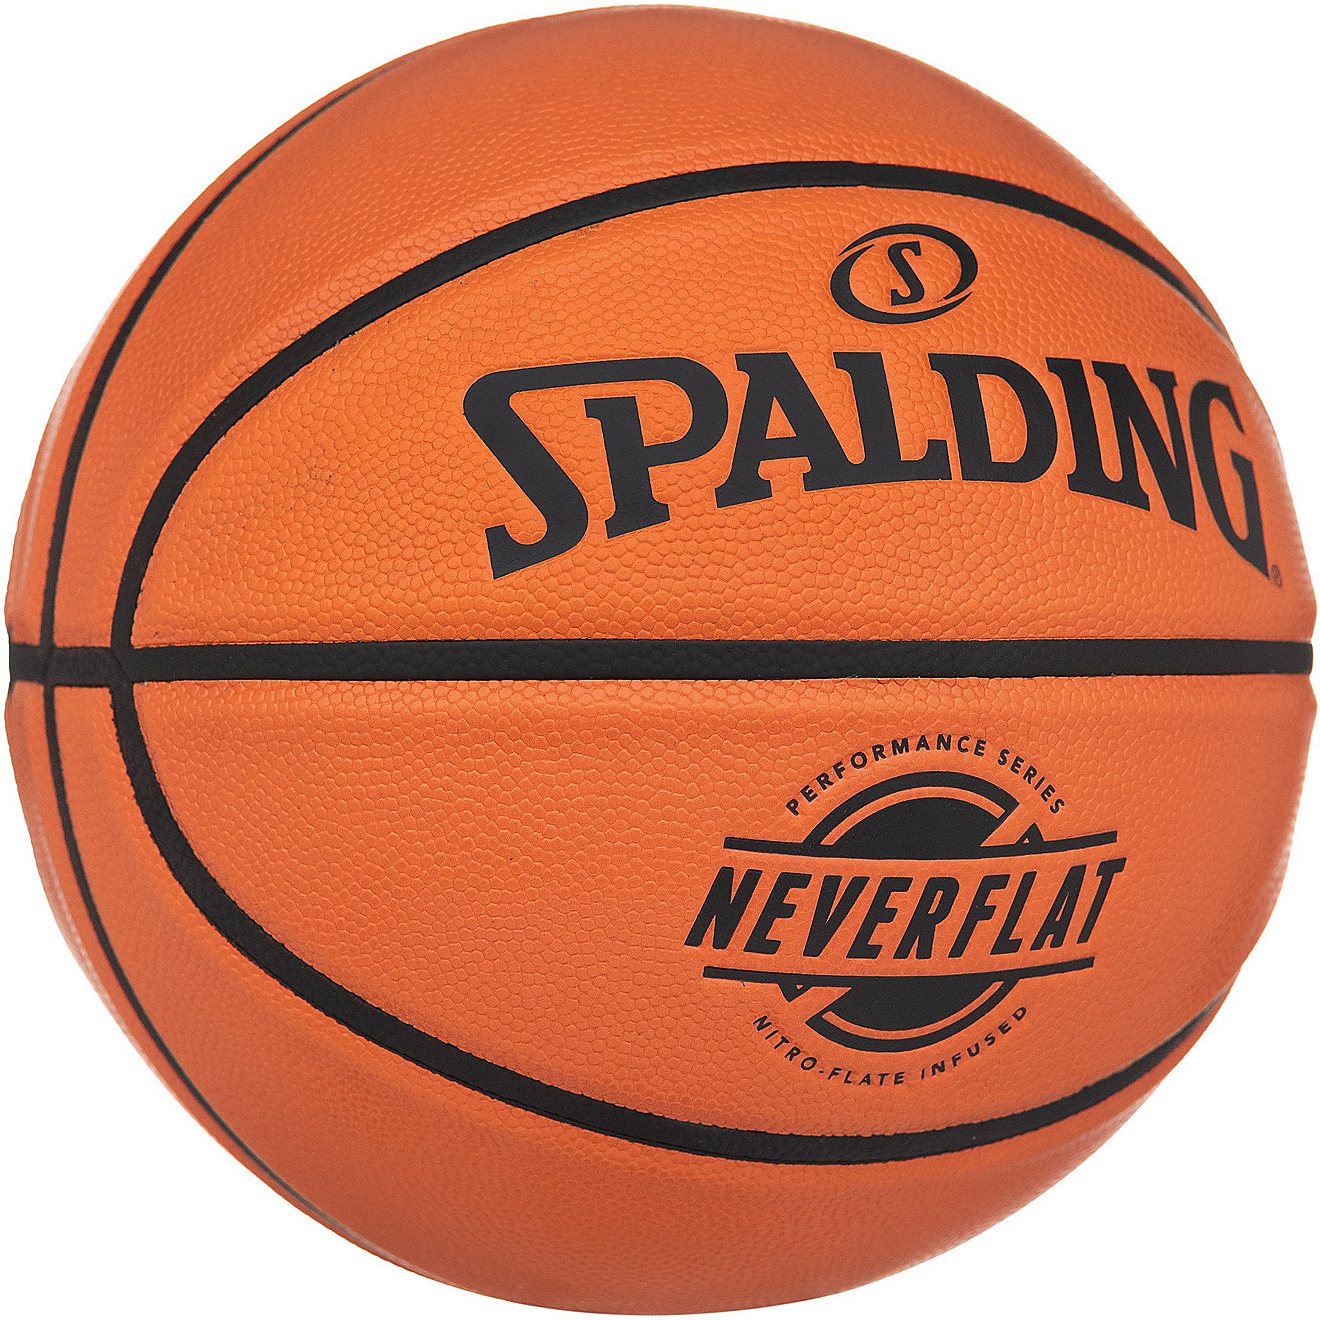 Spalding 29.5 in Neverflat Basketball                                                                                            - view number 2